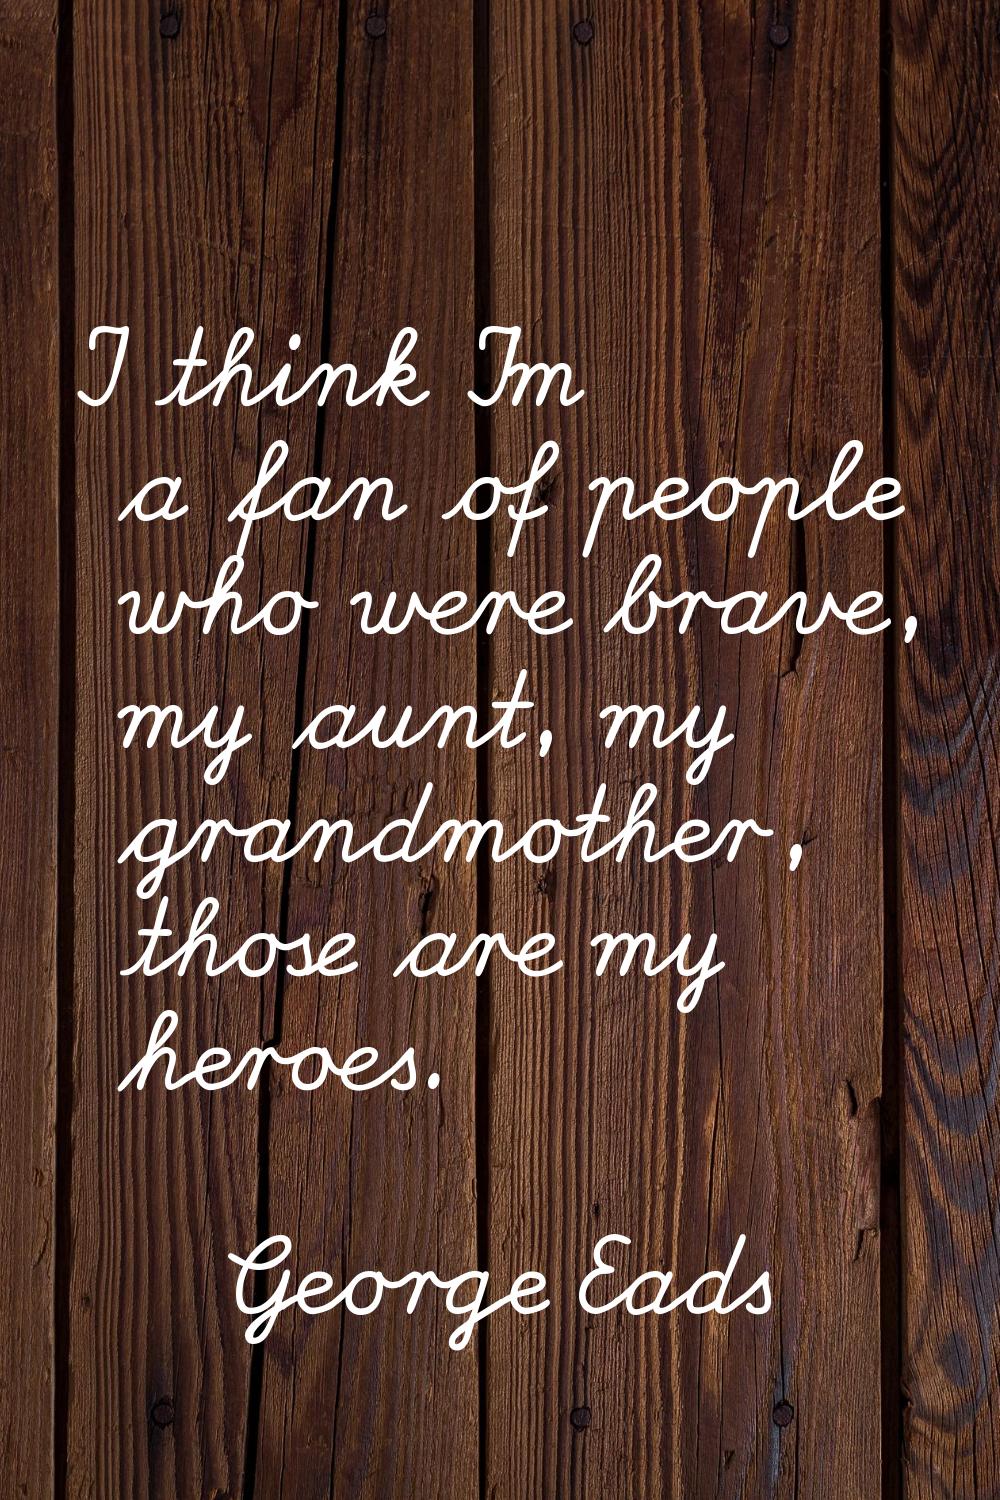 I think I'm a fan of people who were brave, my aunt, my grandmother, those are my heroes.